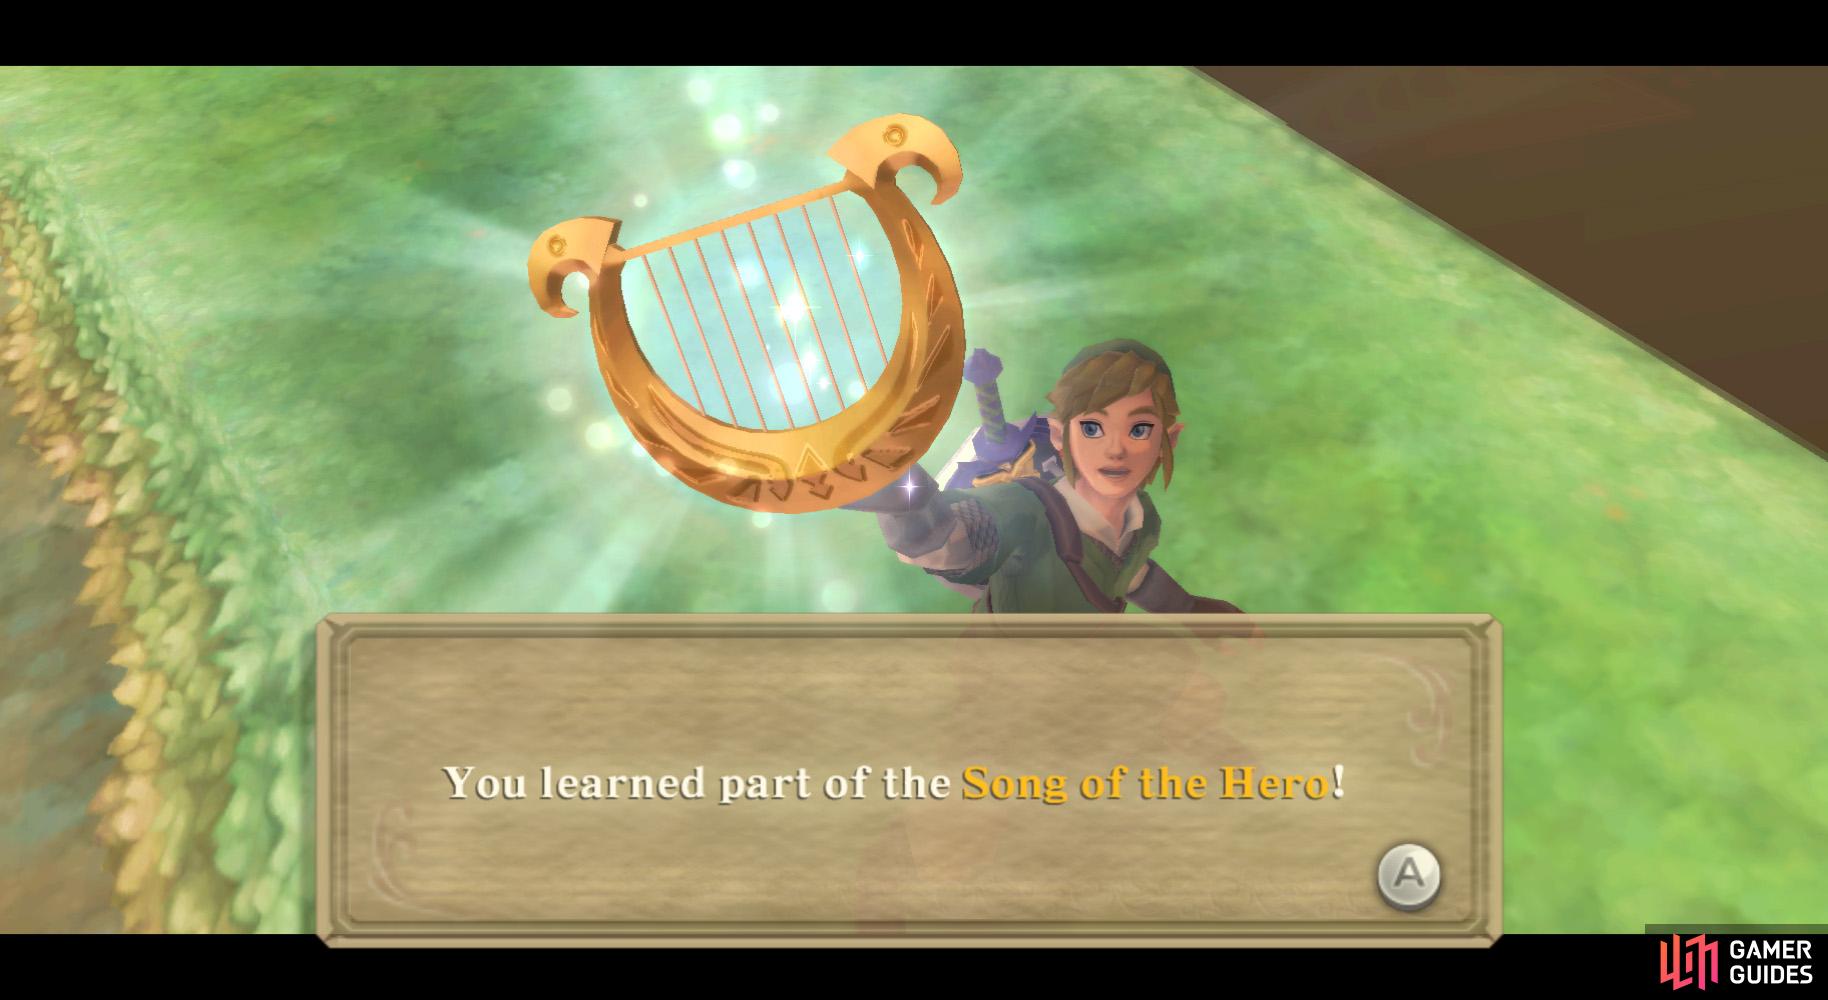 As a reward, you'll get another part of the Song of the Hero.